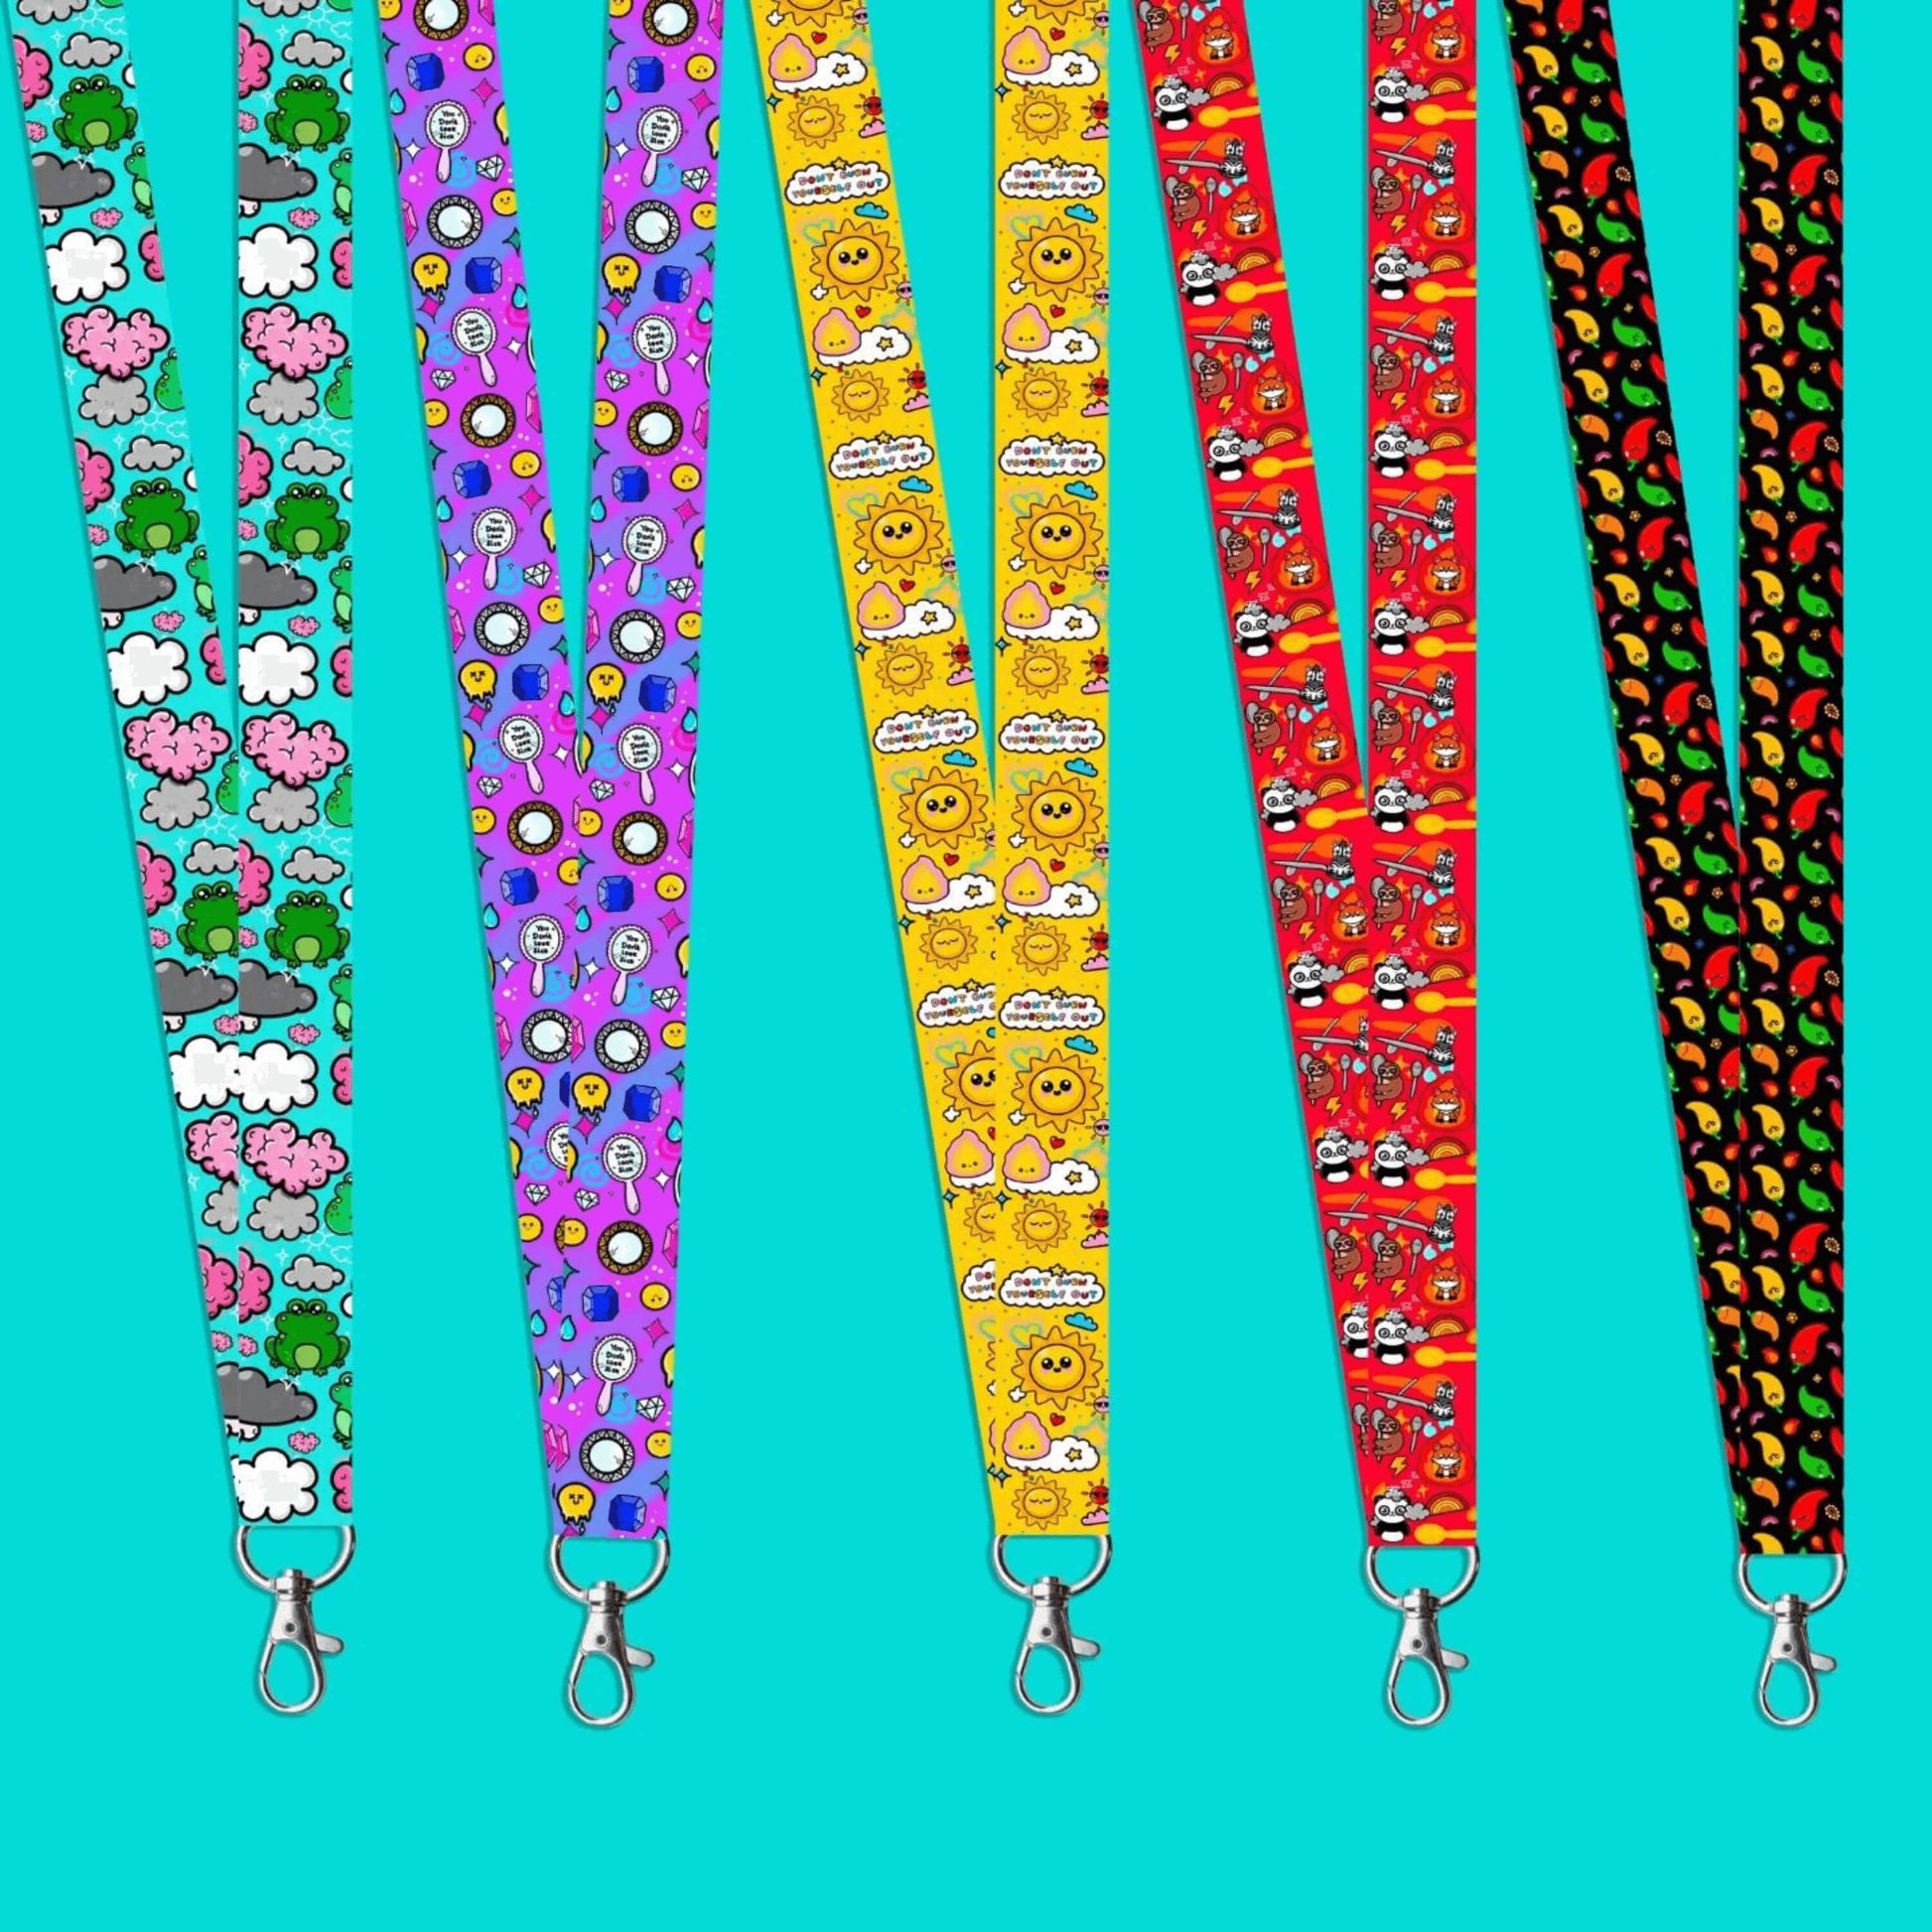 Brain Frog lanyard featuring various green frogs and pink, grey, white clouds with white sparkles, You Don't Look Sick lanyard of mirrors and gems with melting smiley faces, Burn Out lanyard of yellow, red sunshines, clouds and fires on yellow, Spoonie lanyard of various animals with spoons, fire and rainbows, and Neuro-Spicy lanyard of green, orange, red, yellow chilli peppers with rainbows and flames on a blue background.